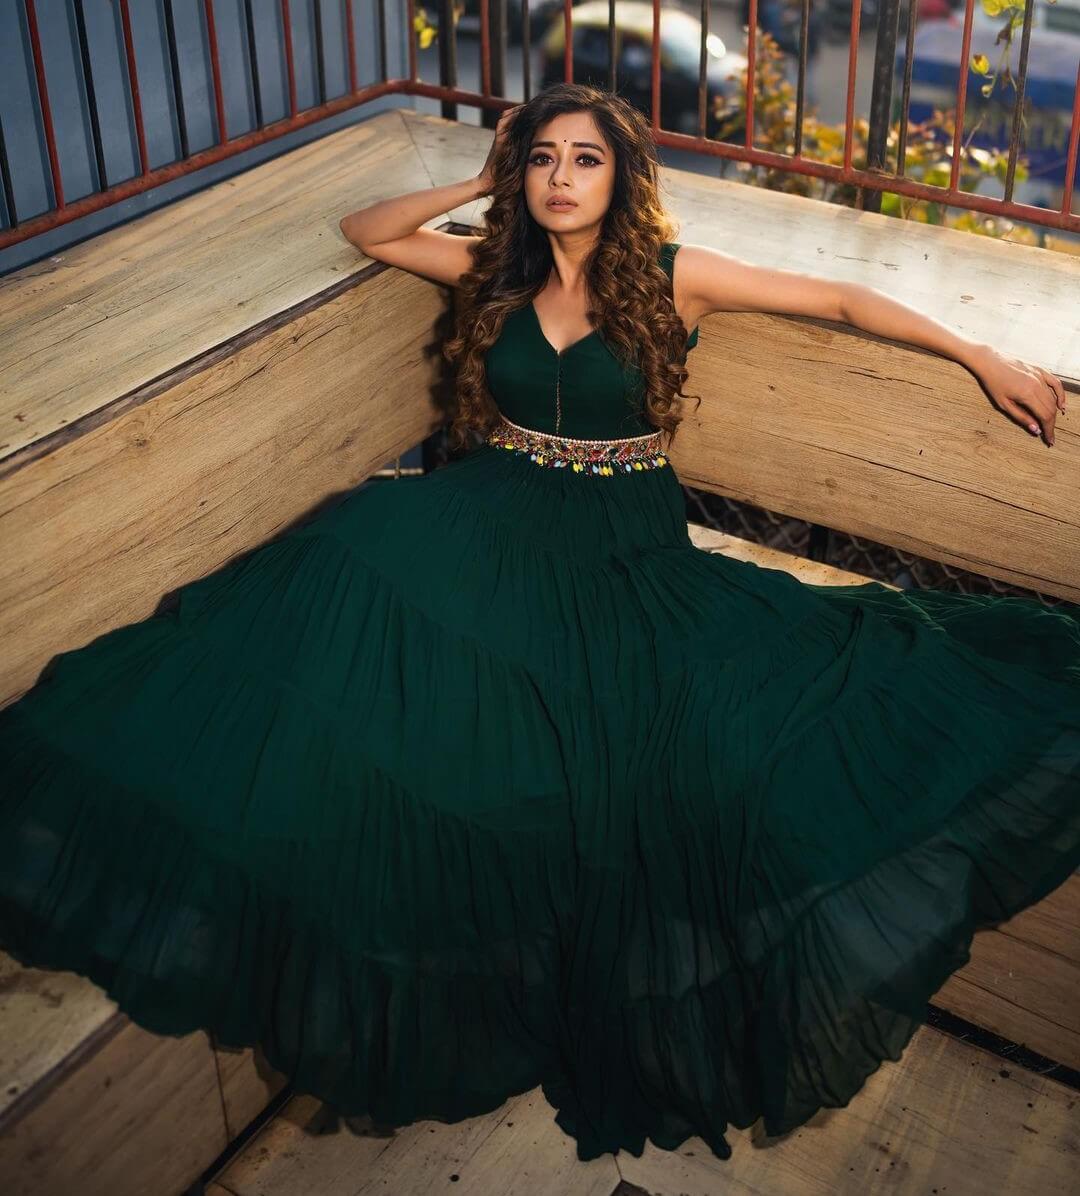 Tina Datta's Show-Stopping Republic Day Look!